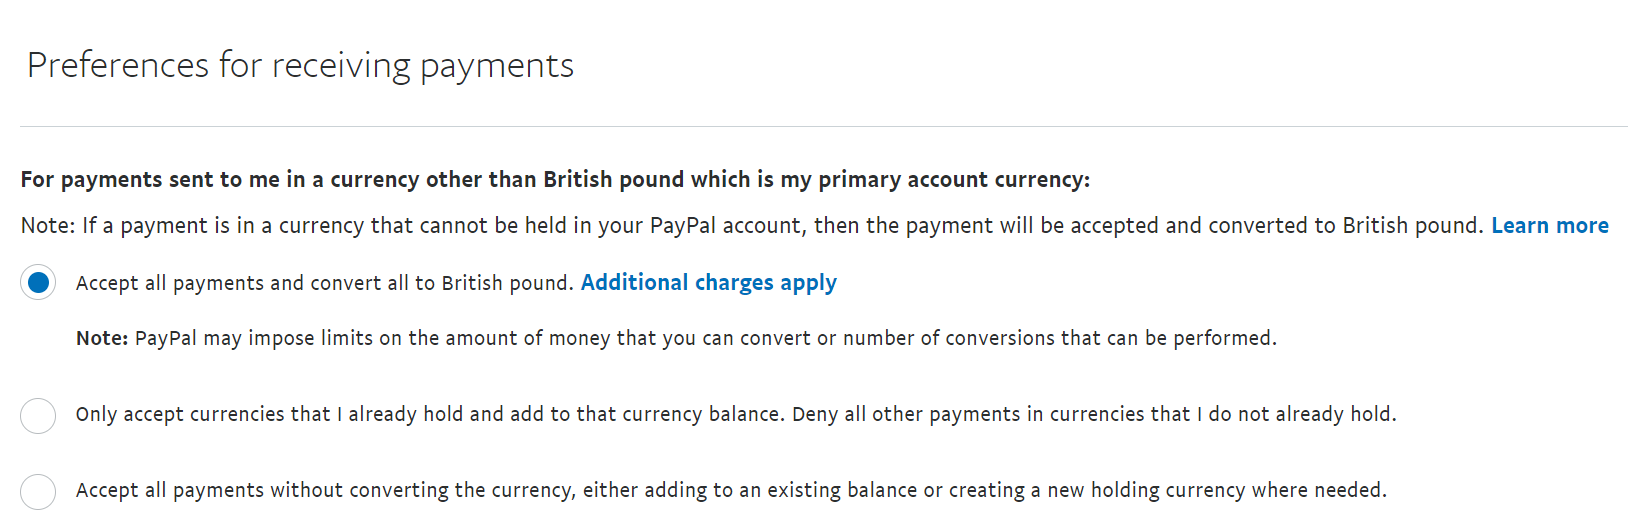 paypal-receiving-currency-preferences.png